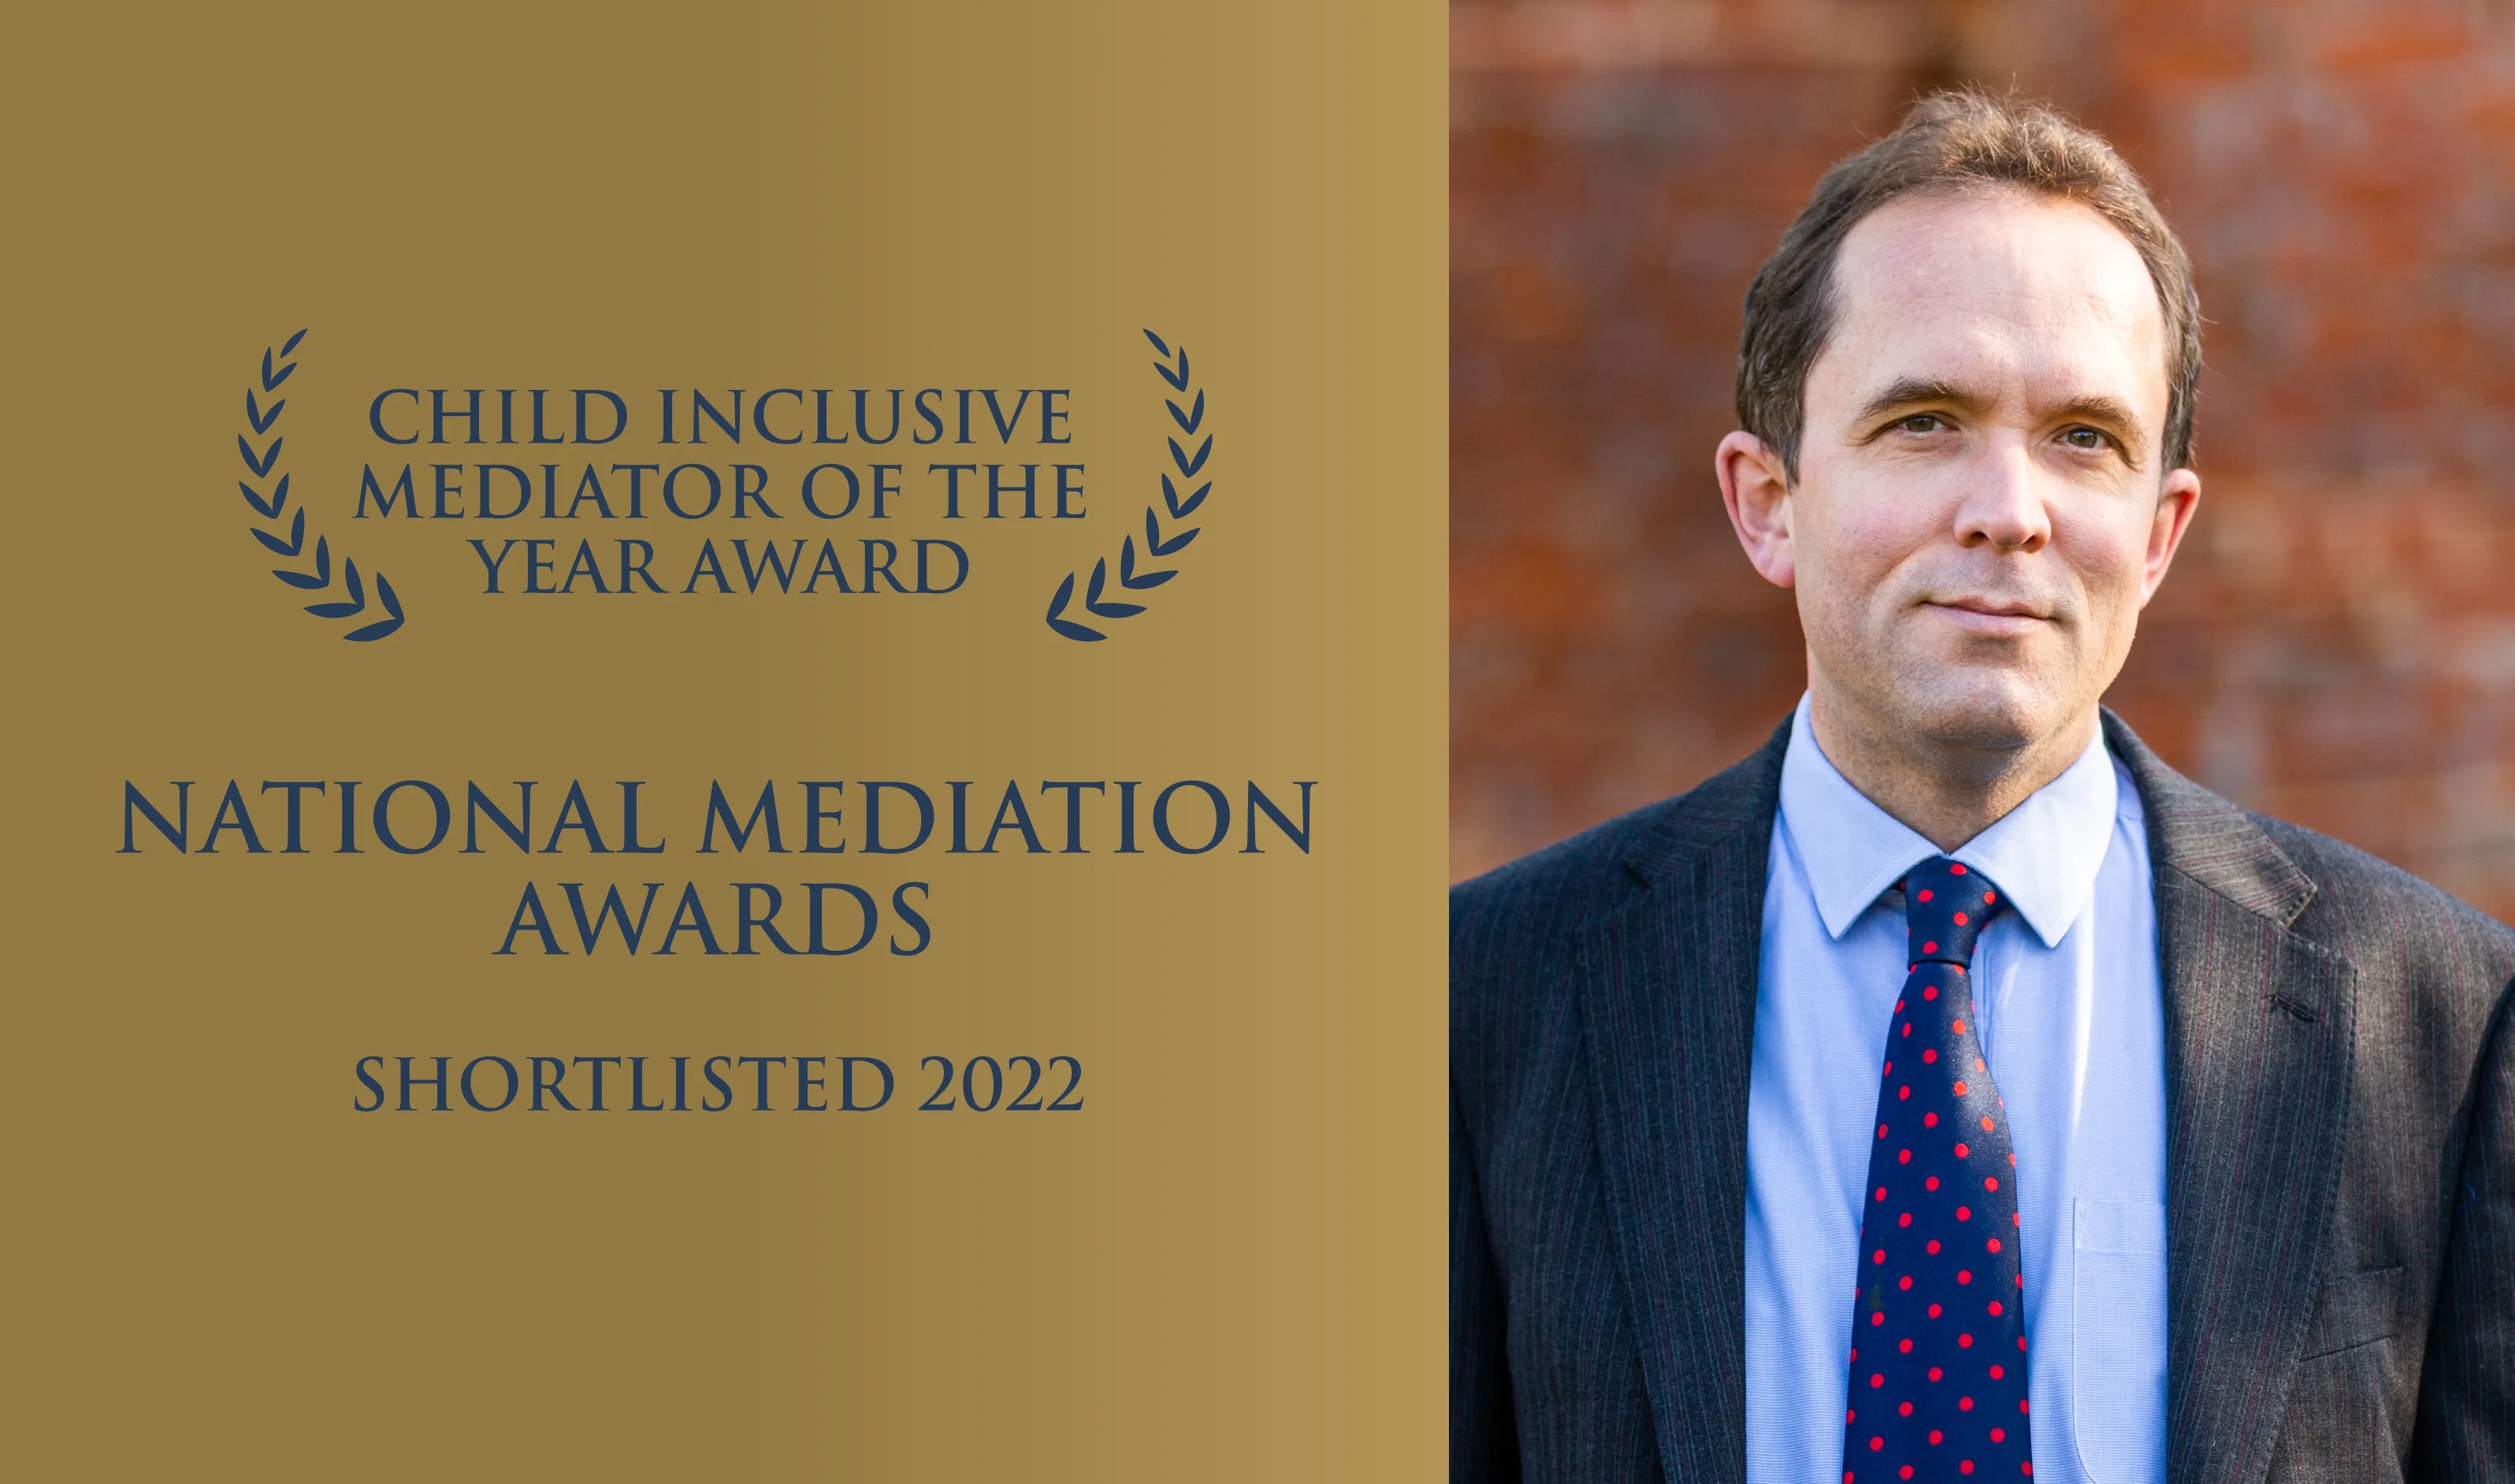 Edward Cooke shortlisted for Child Inclusive Mediator of the Year Award 2022